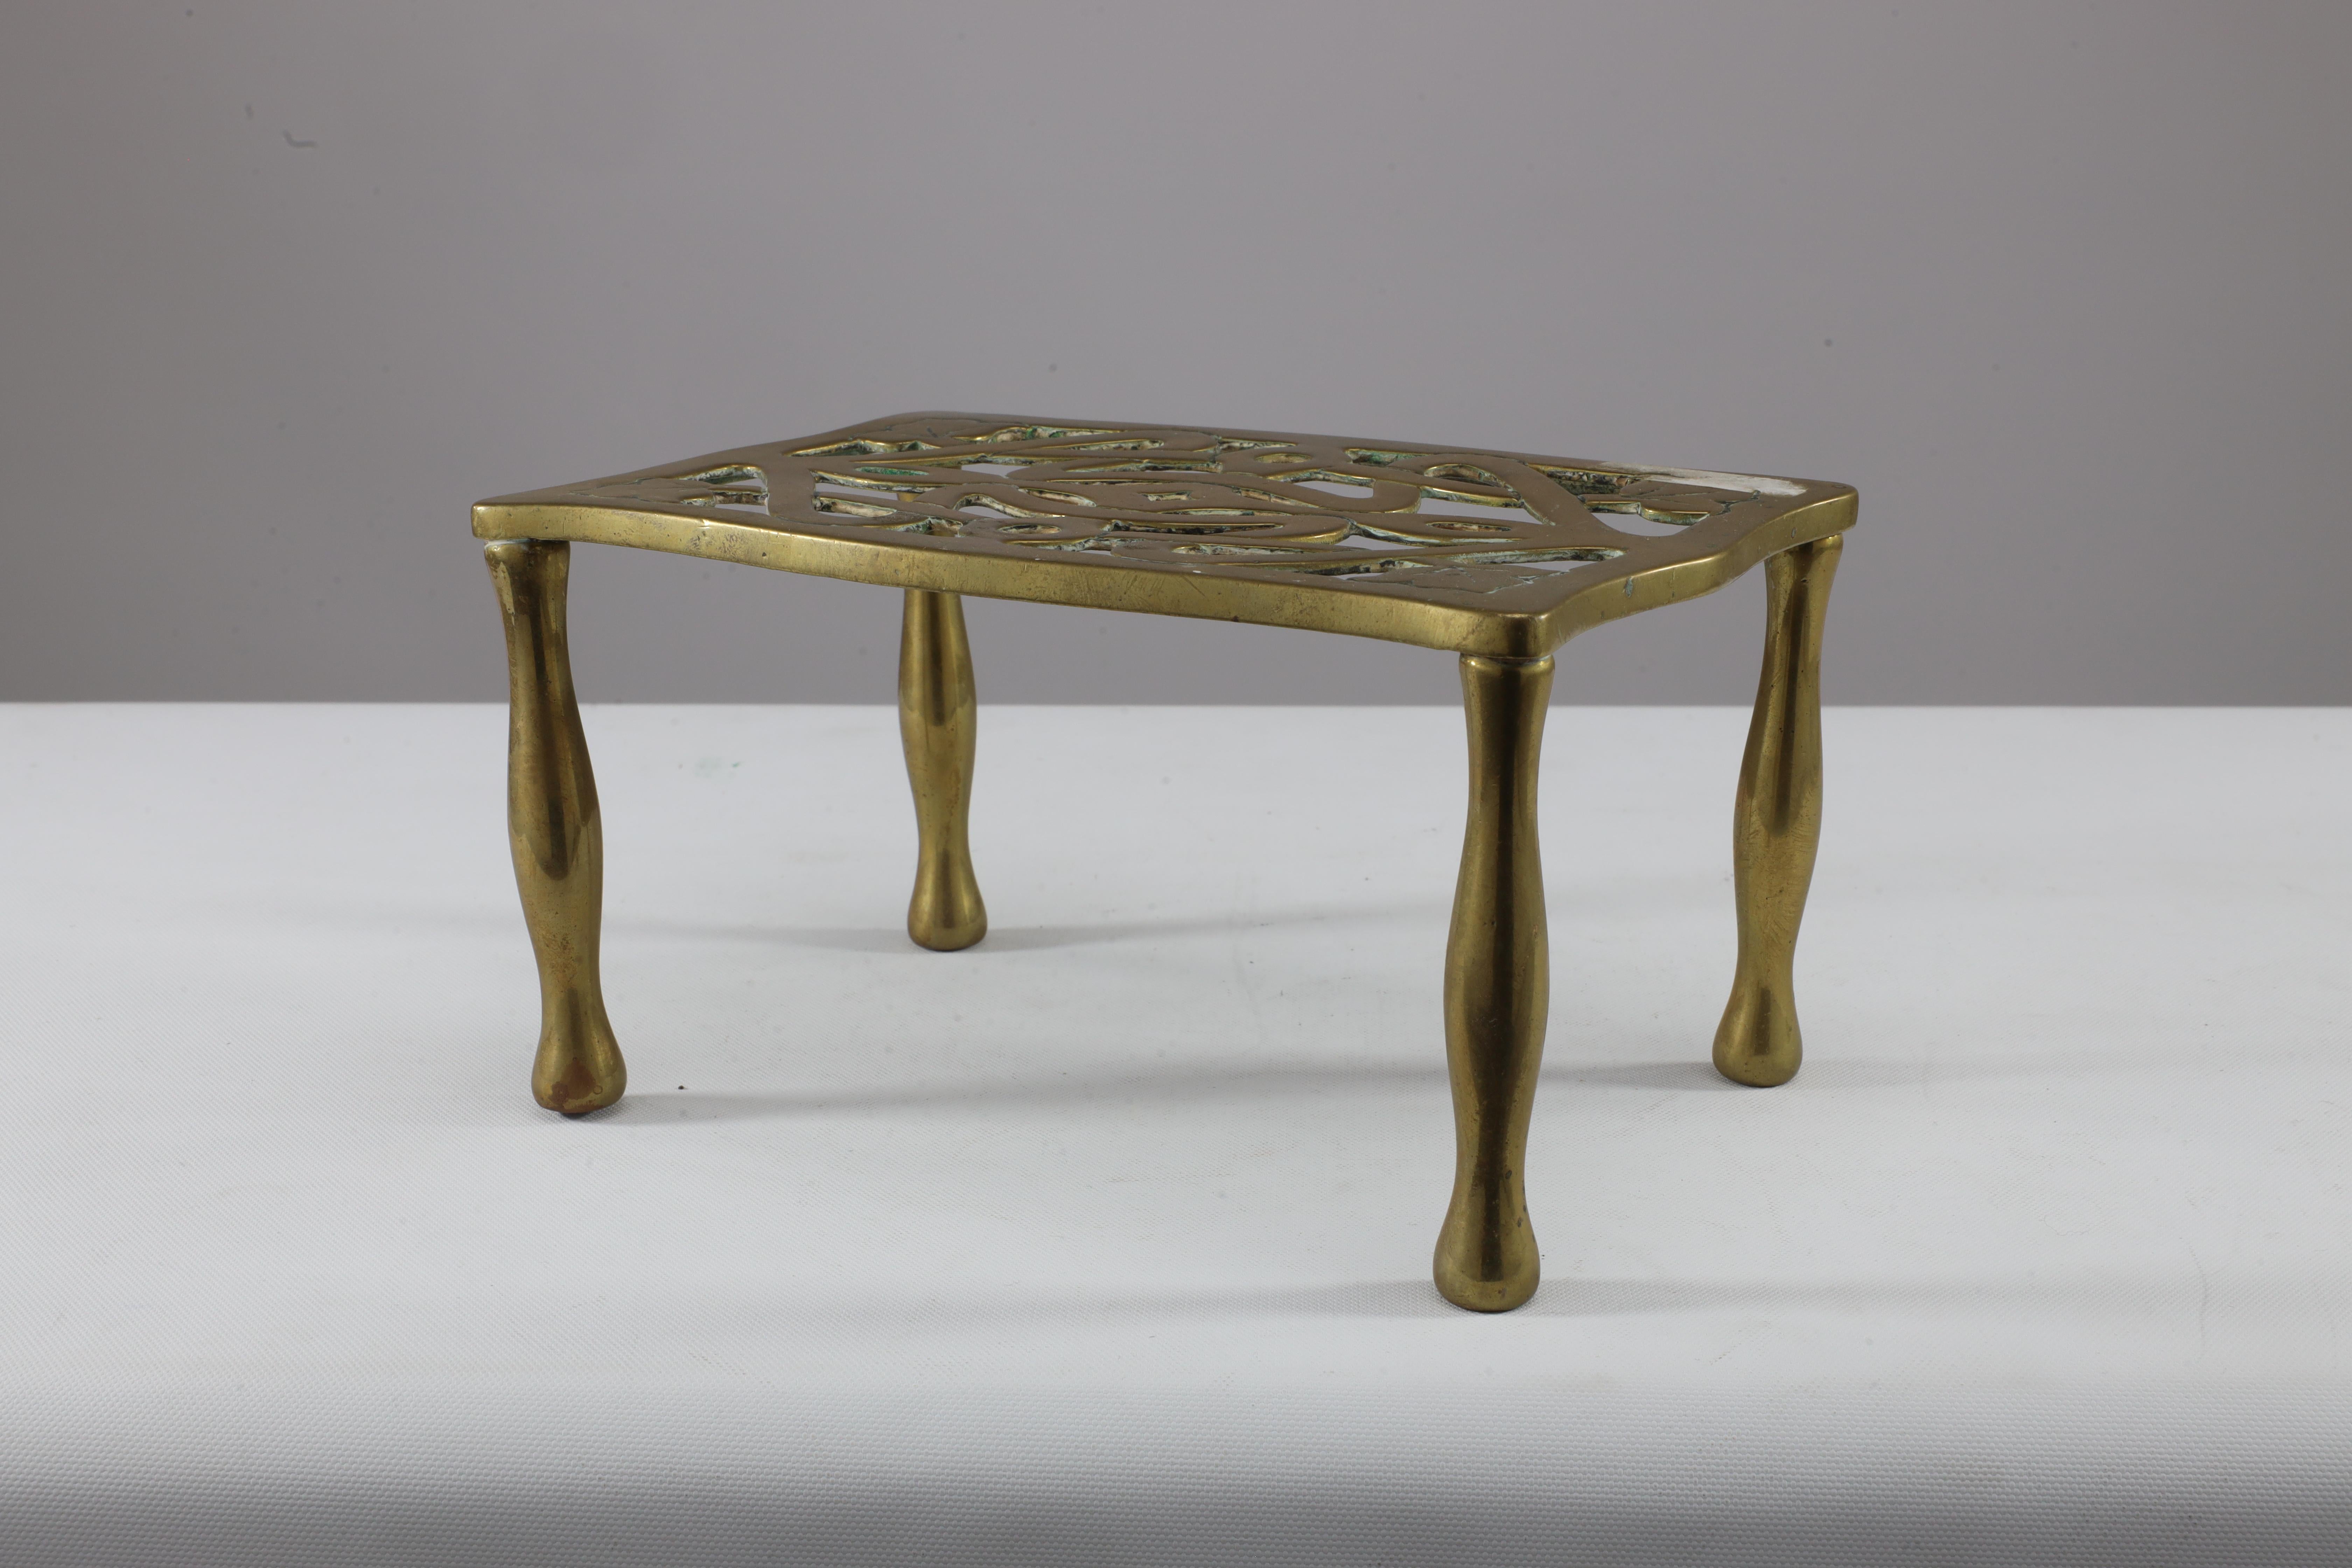 An Arts and Crafts brass trivet with pierced floral decoration to the top, on shaped legs.